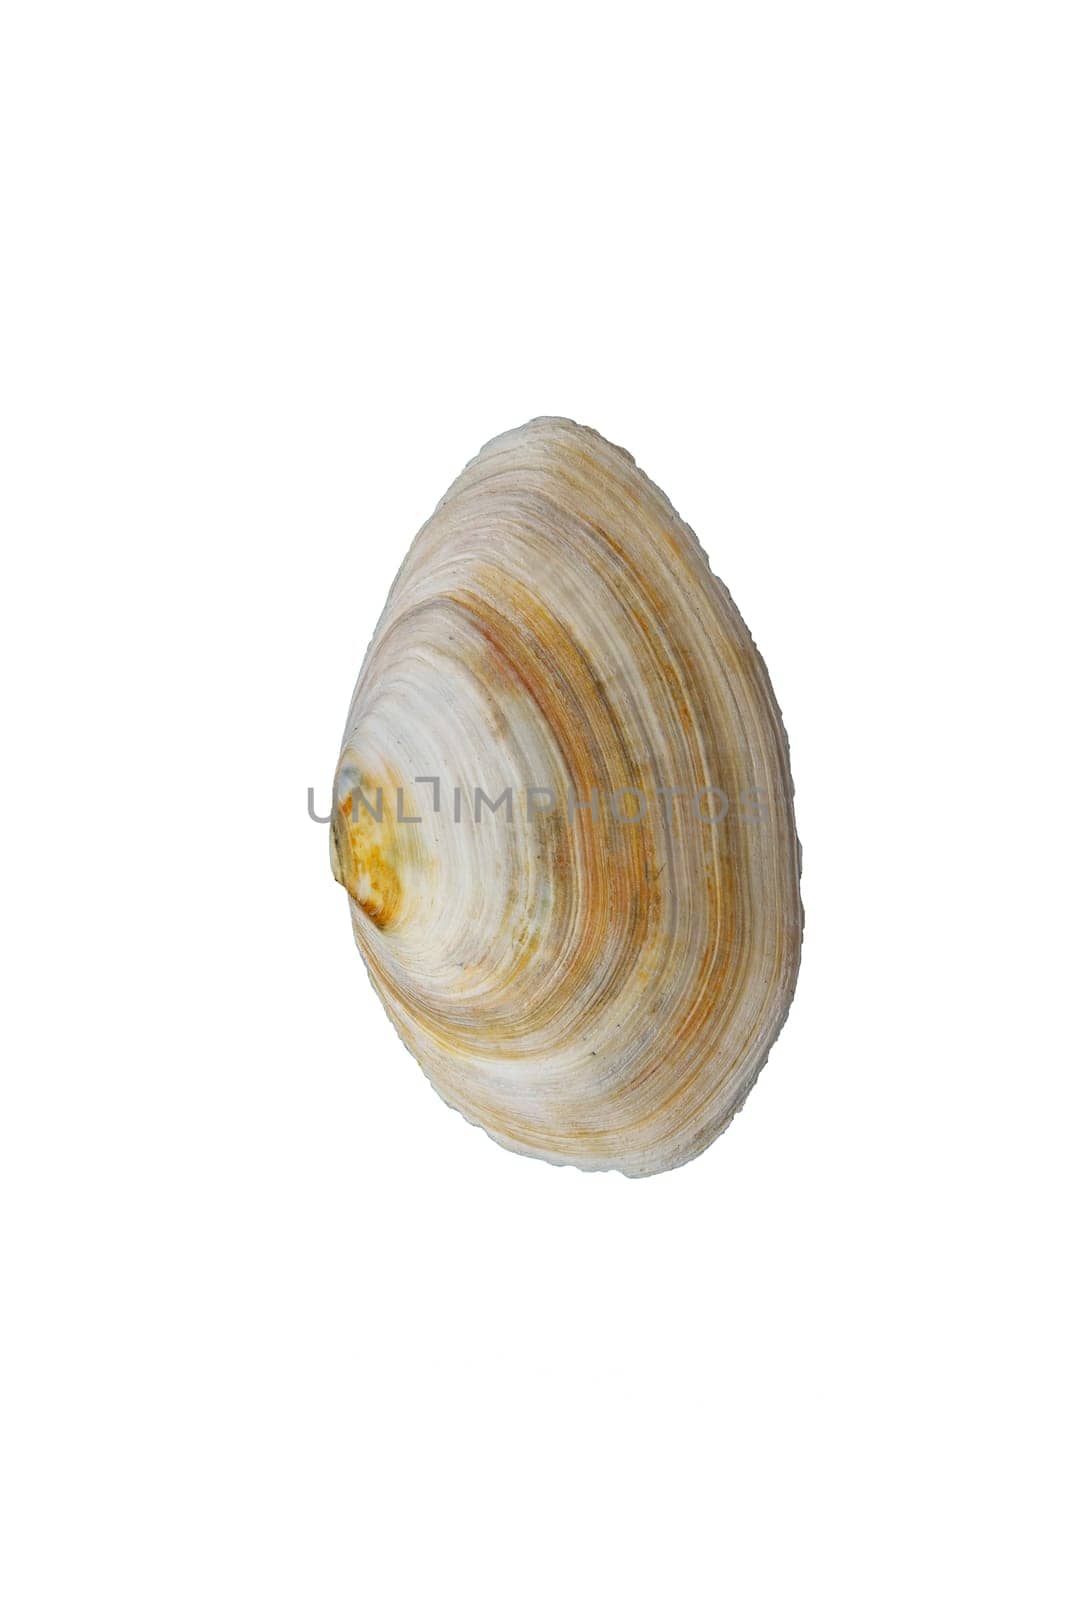 Sea big clam shell, isolated on white. Vertical view